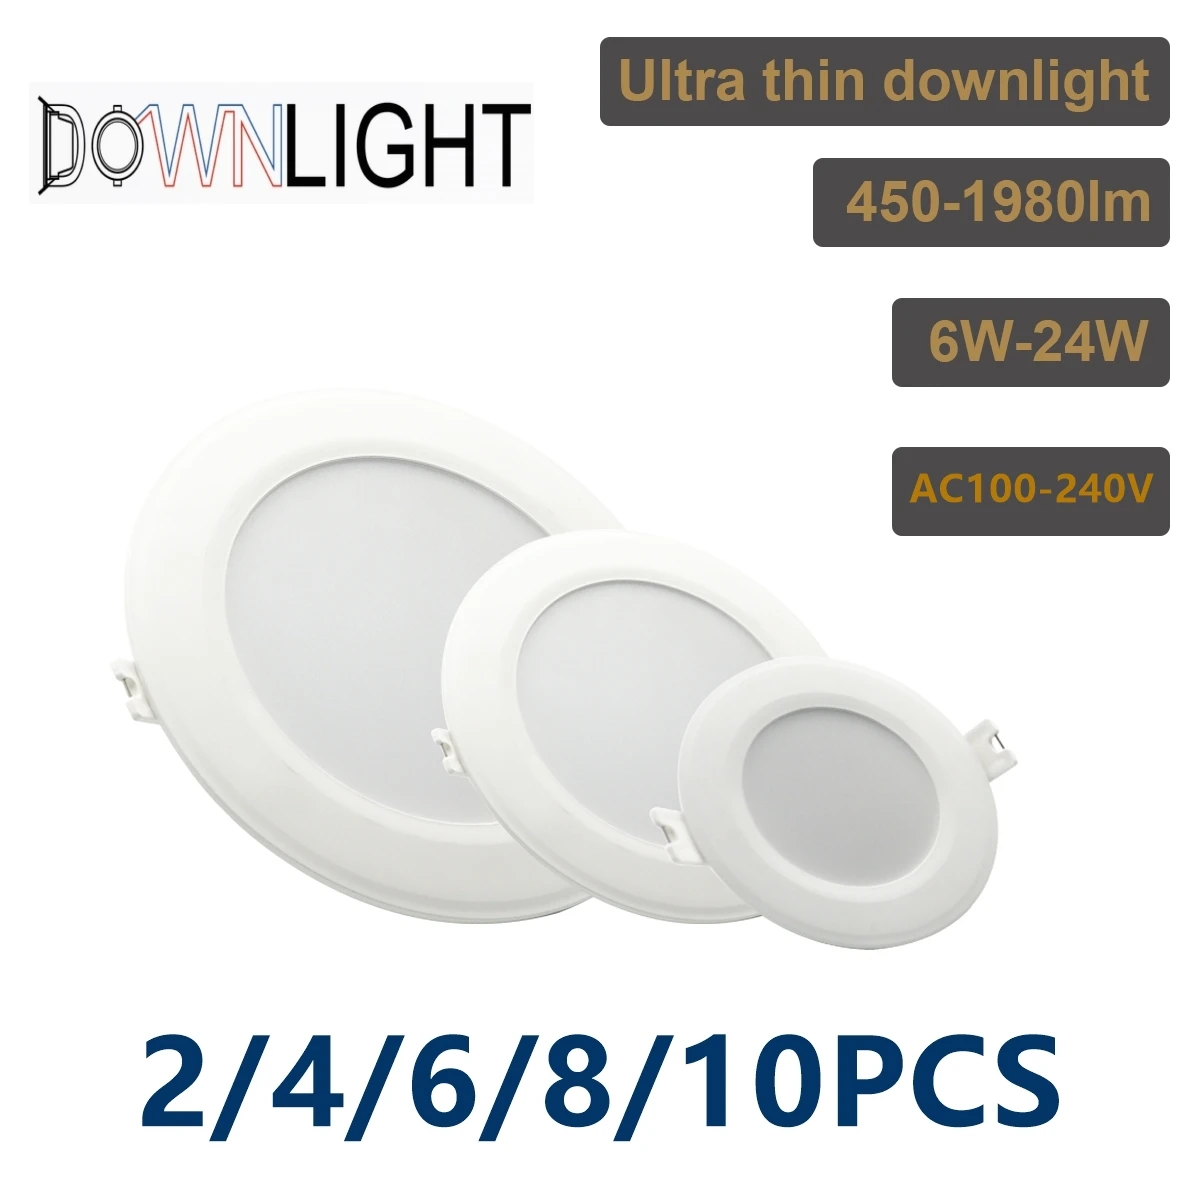 Recessed Down Led Downlight AC110V AC230V Ceiling Light High Power 24W Super bright lights  Suitable for kitchen bathroom mall